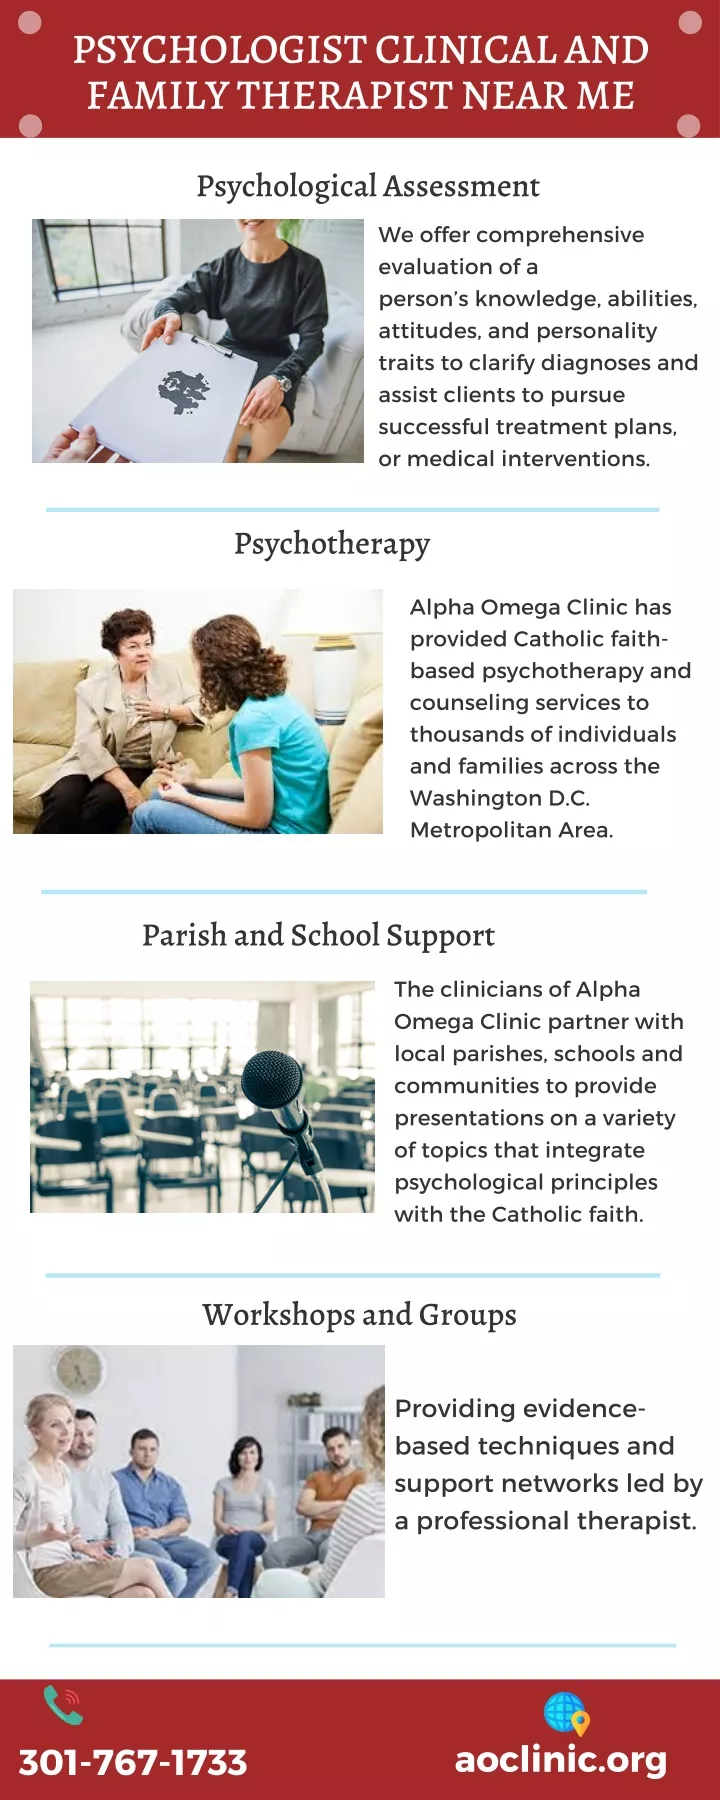 psychologist clinical and family therapist near me